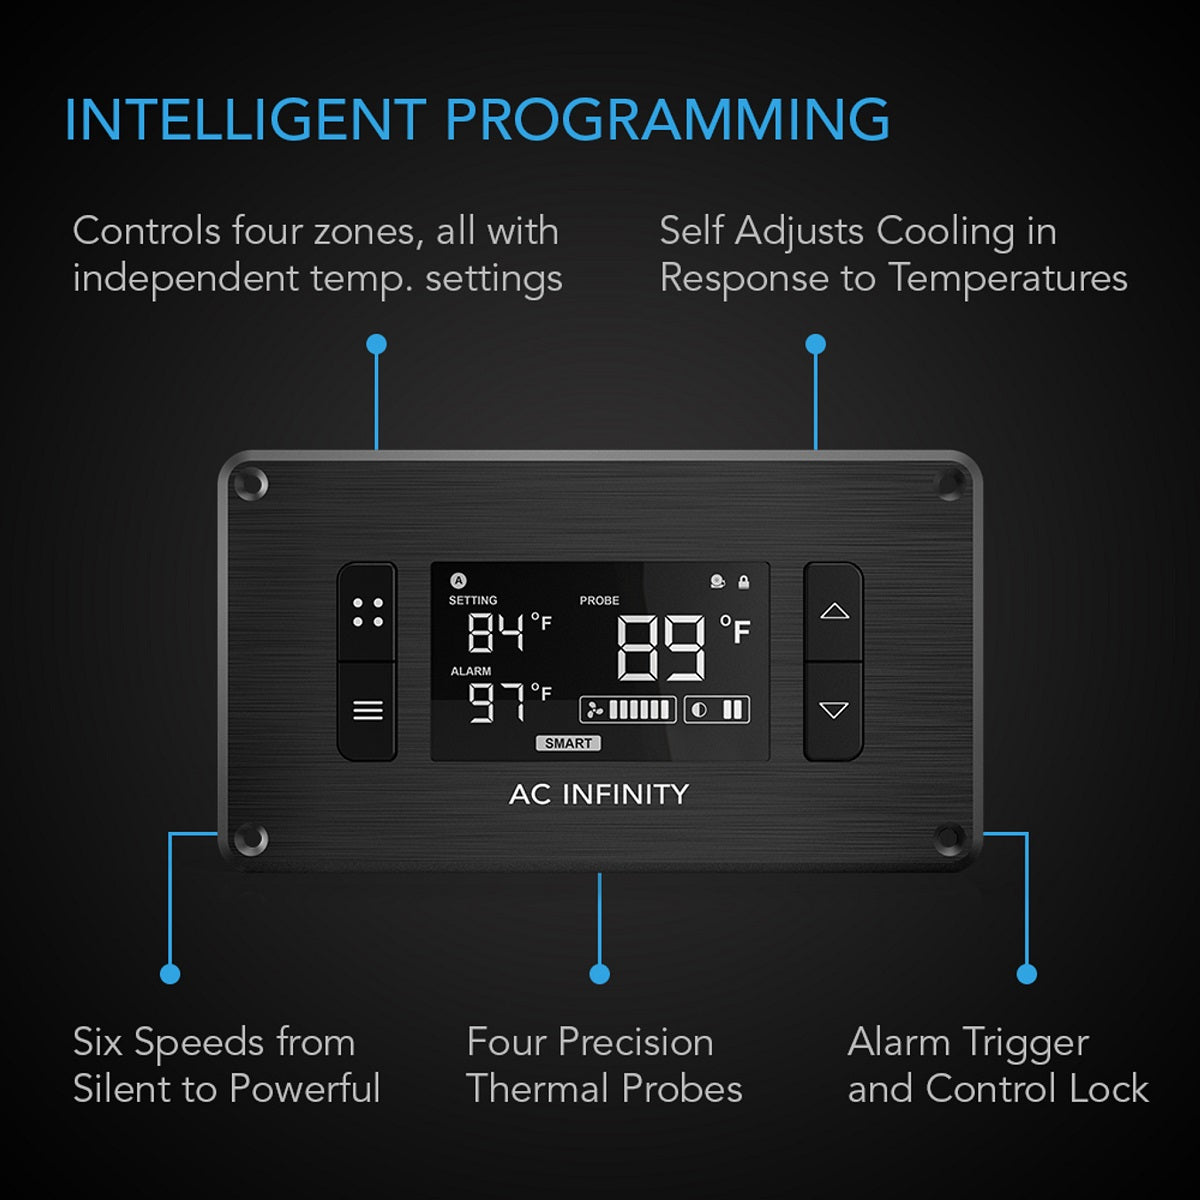 AC Infinity Controller 8 - Controls temperature and humidity in 4 zones